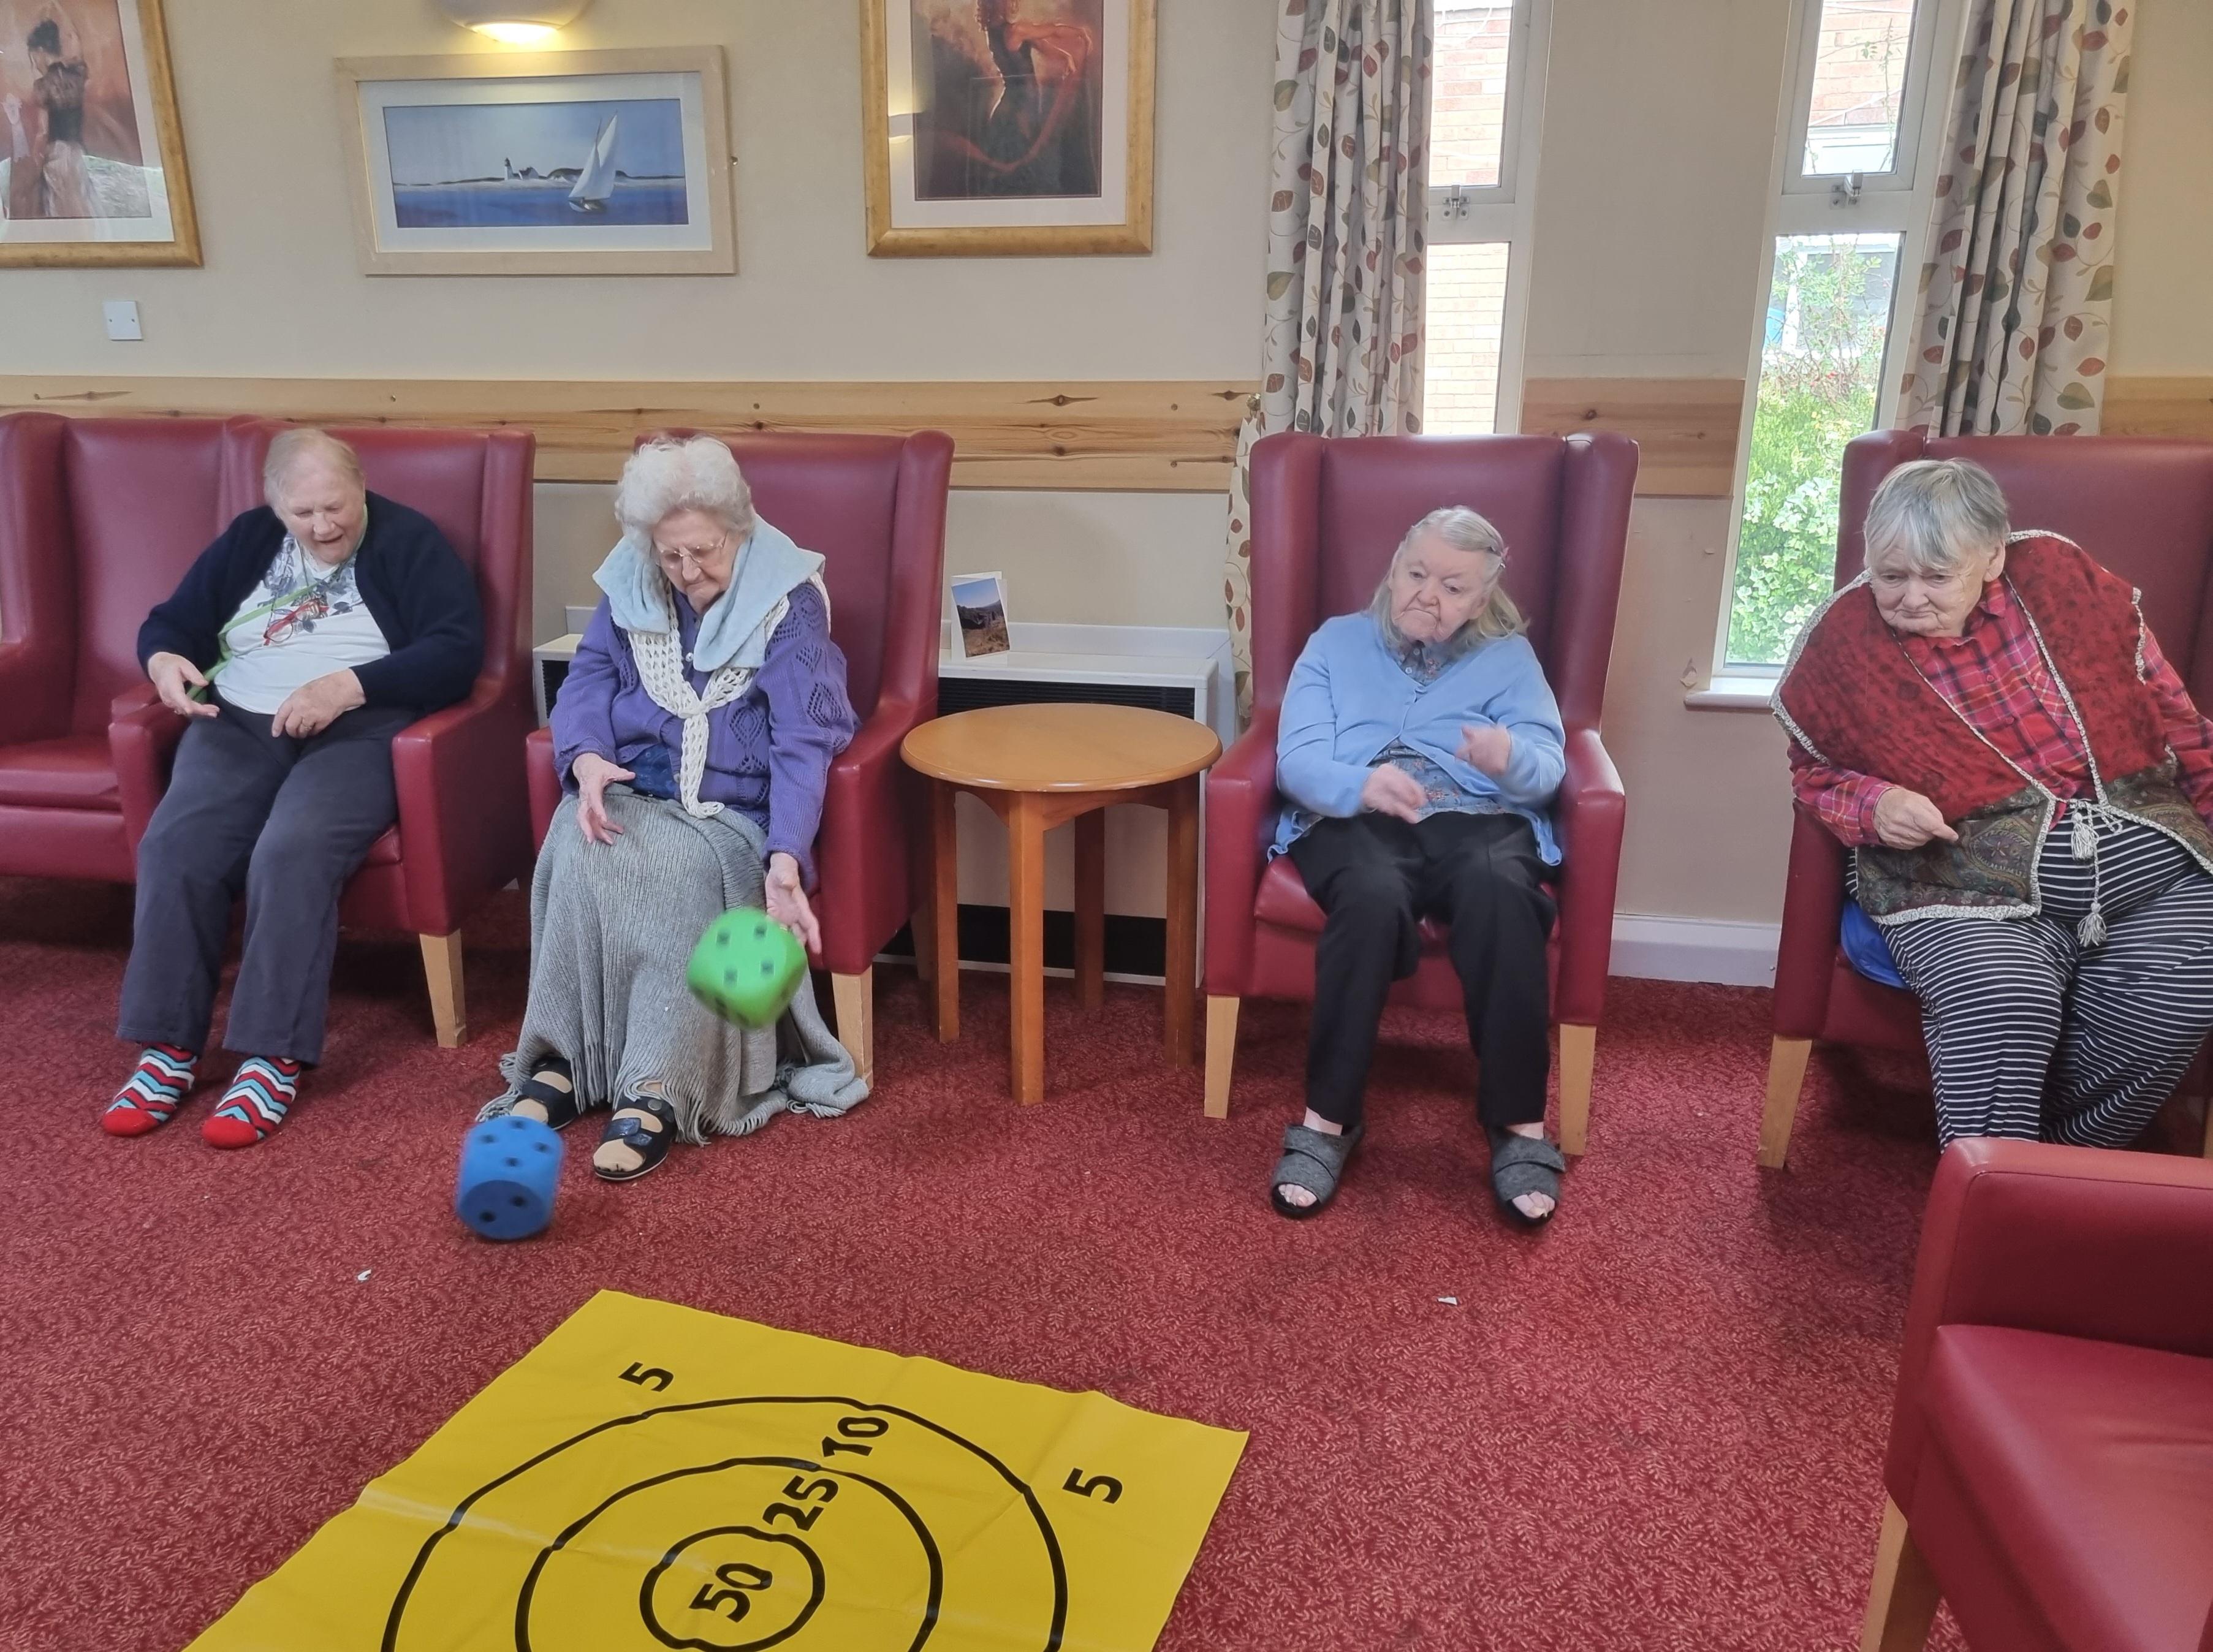 Ladies at Trenewydd throwing a dice as part of their exercise activity  